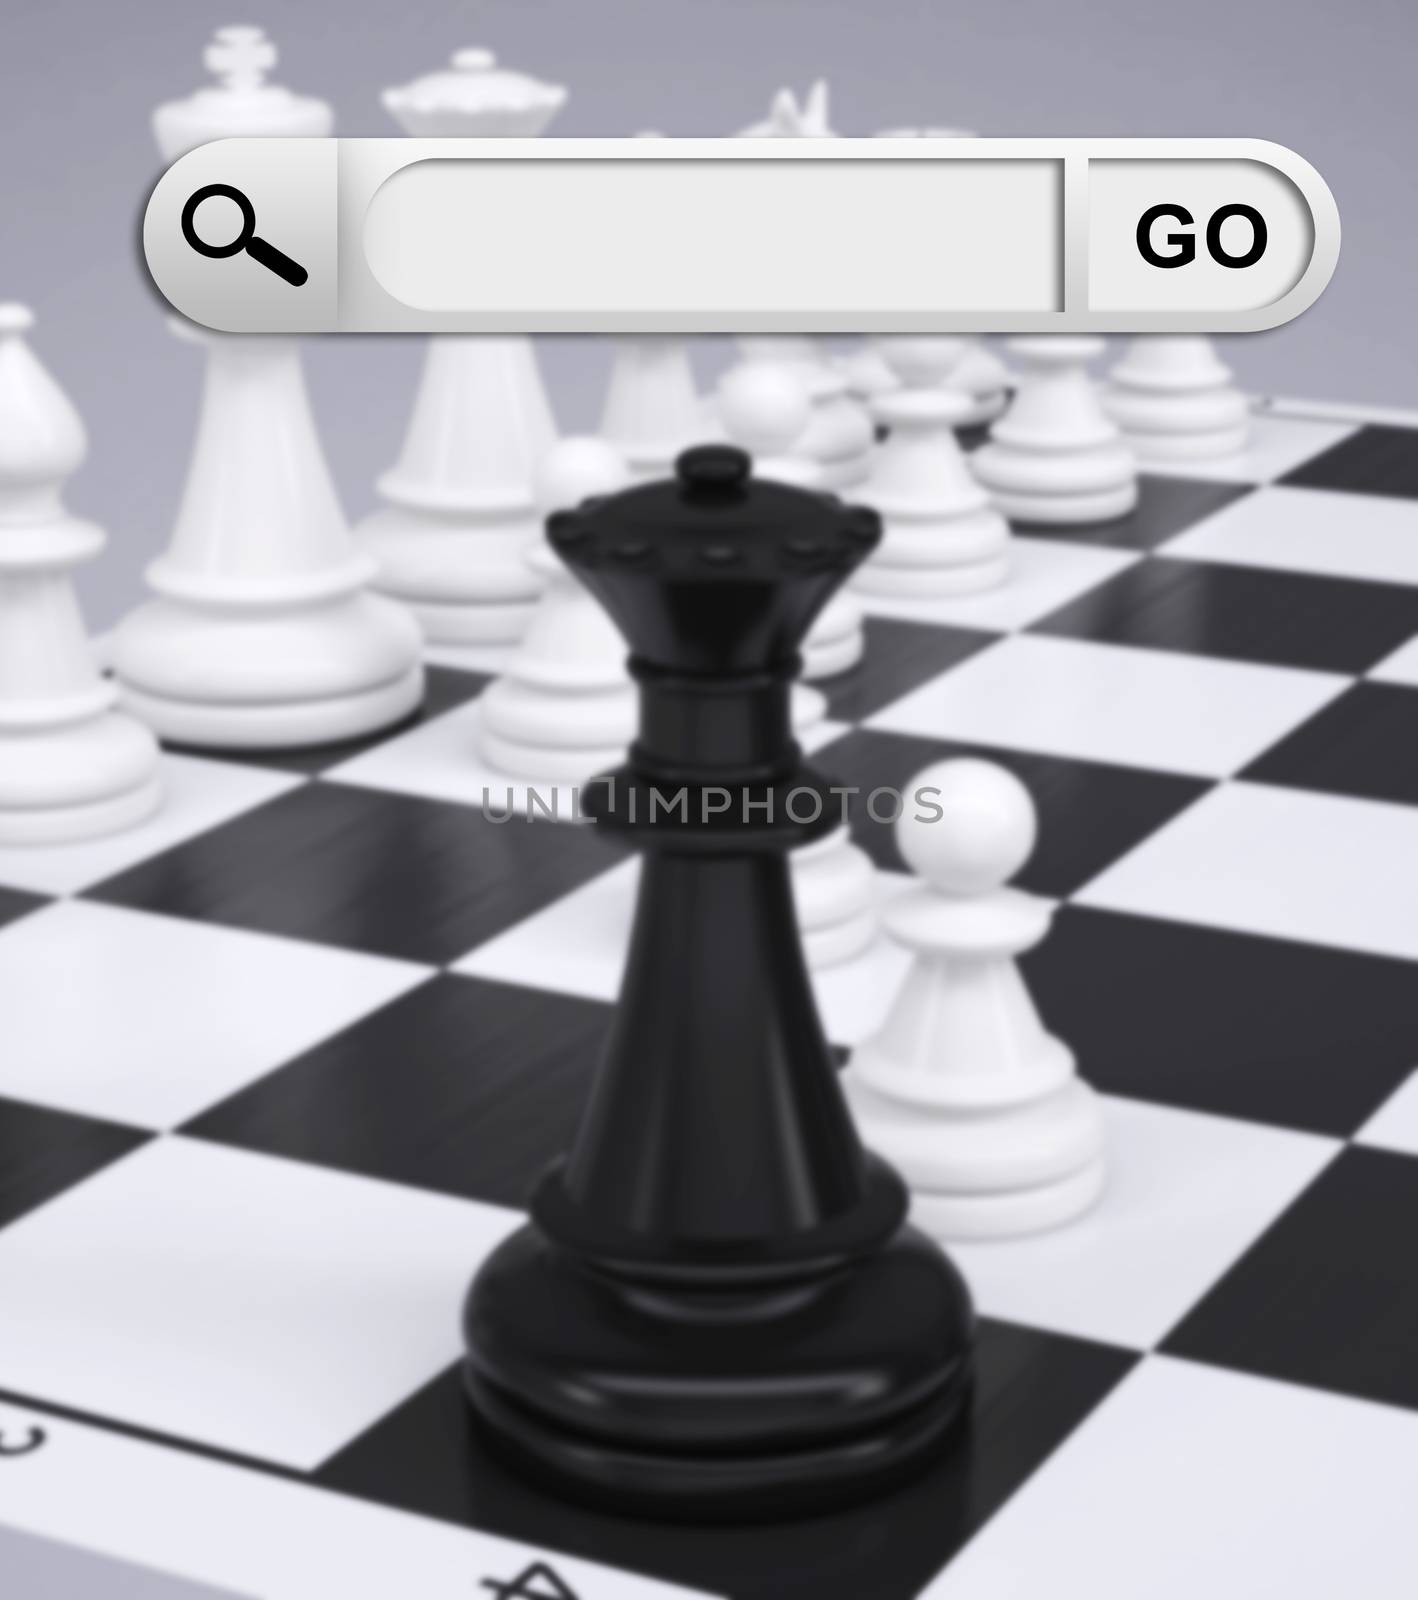 Search bar in browser. Chess pieces and chessboard on background